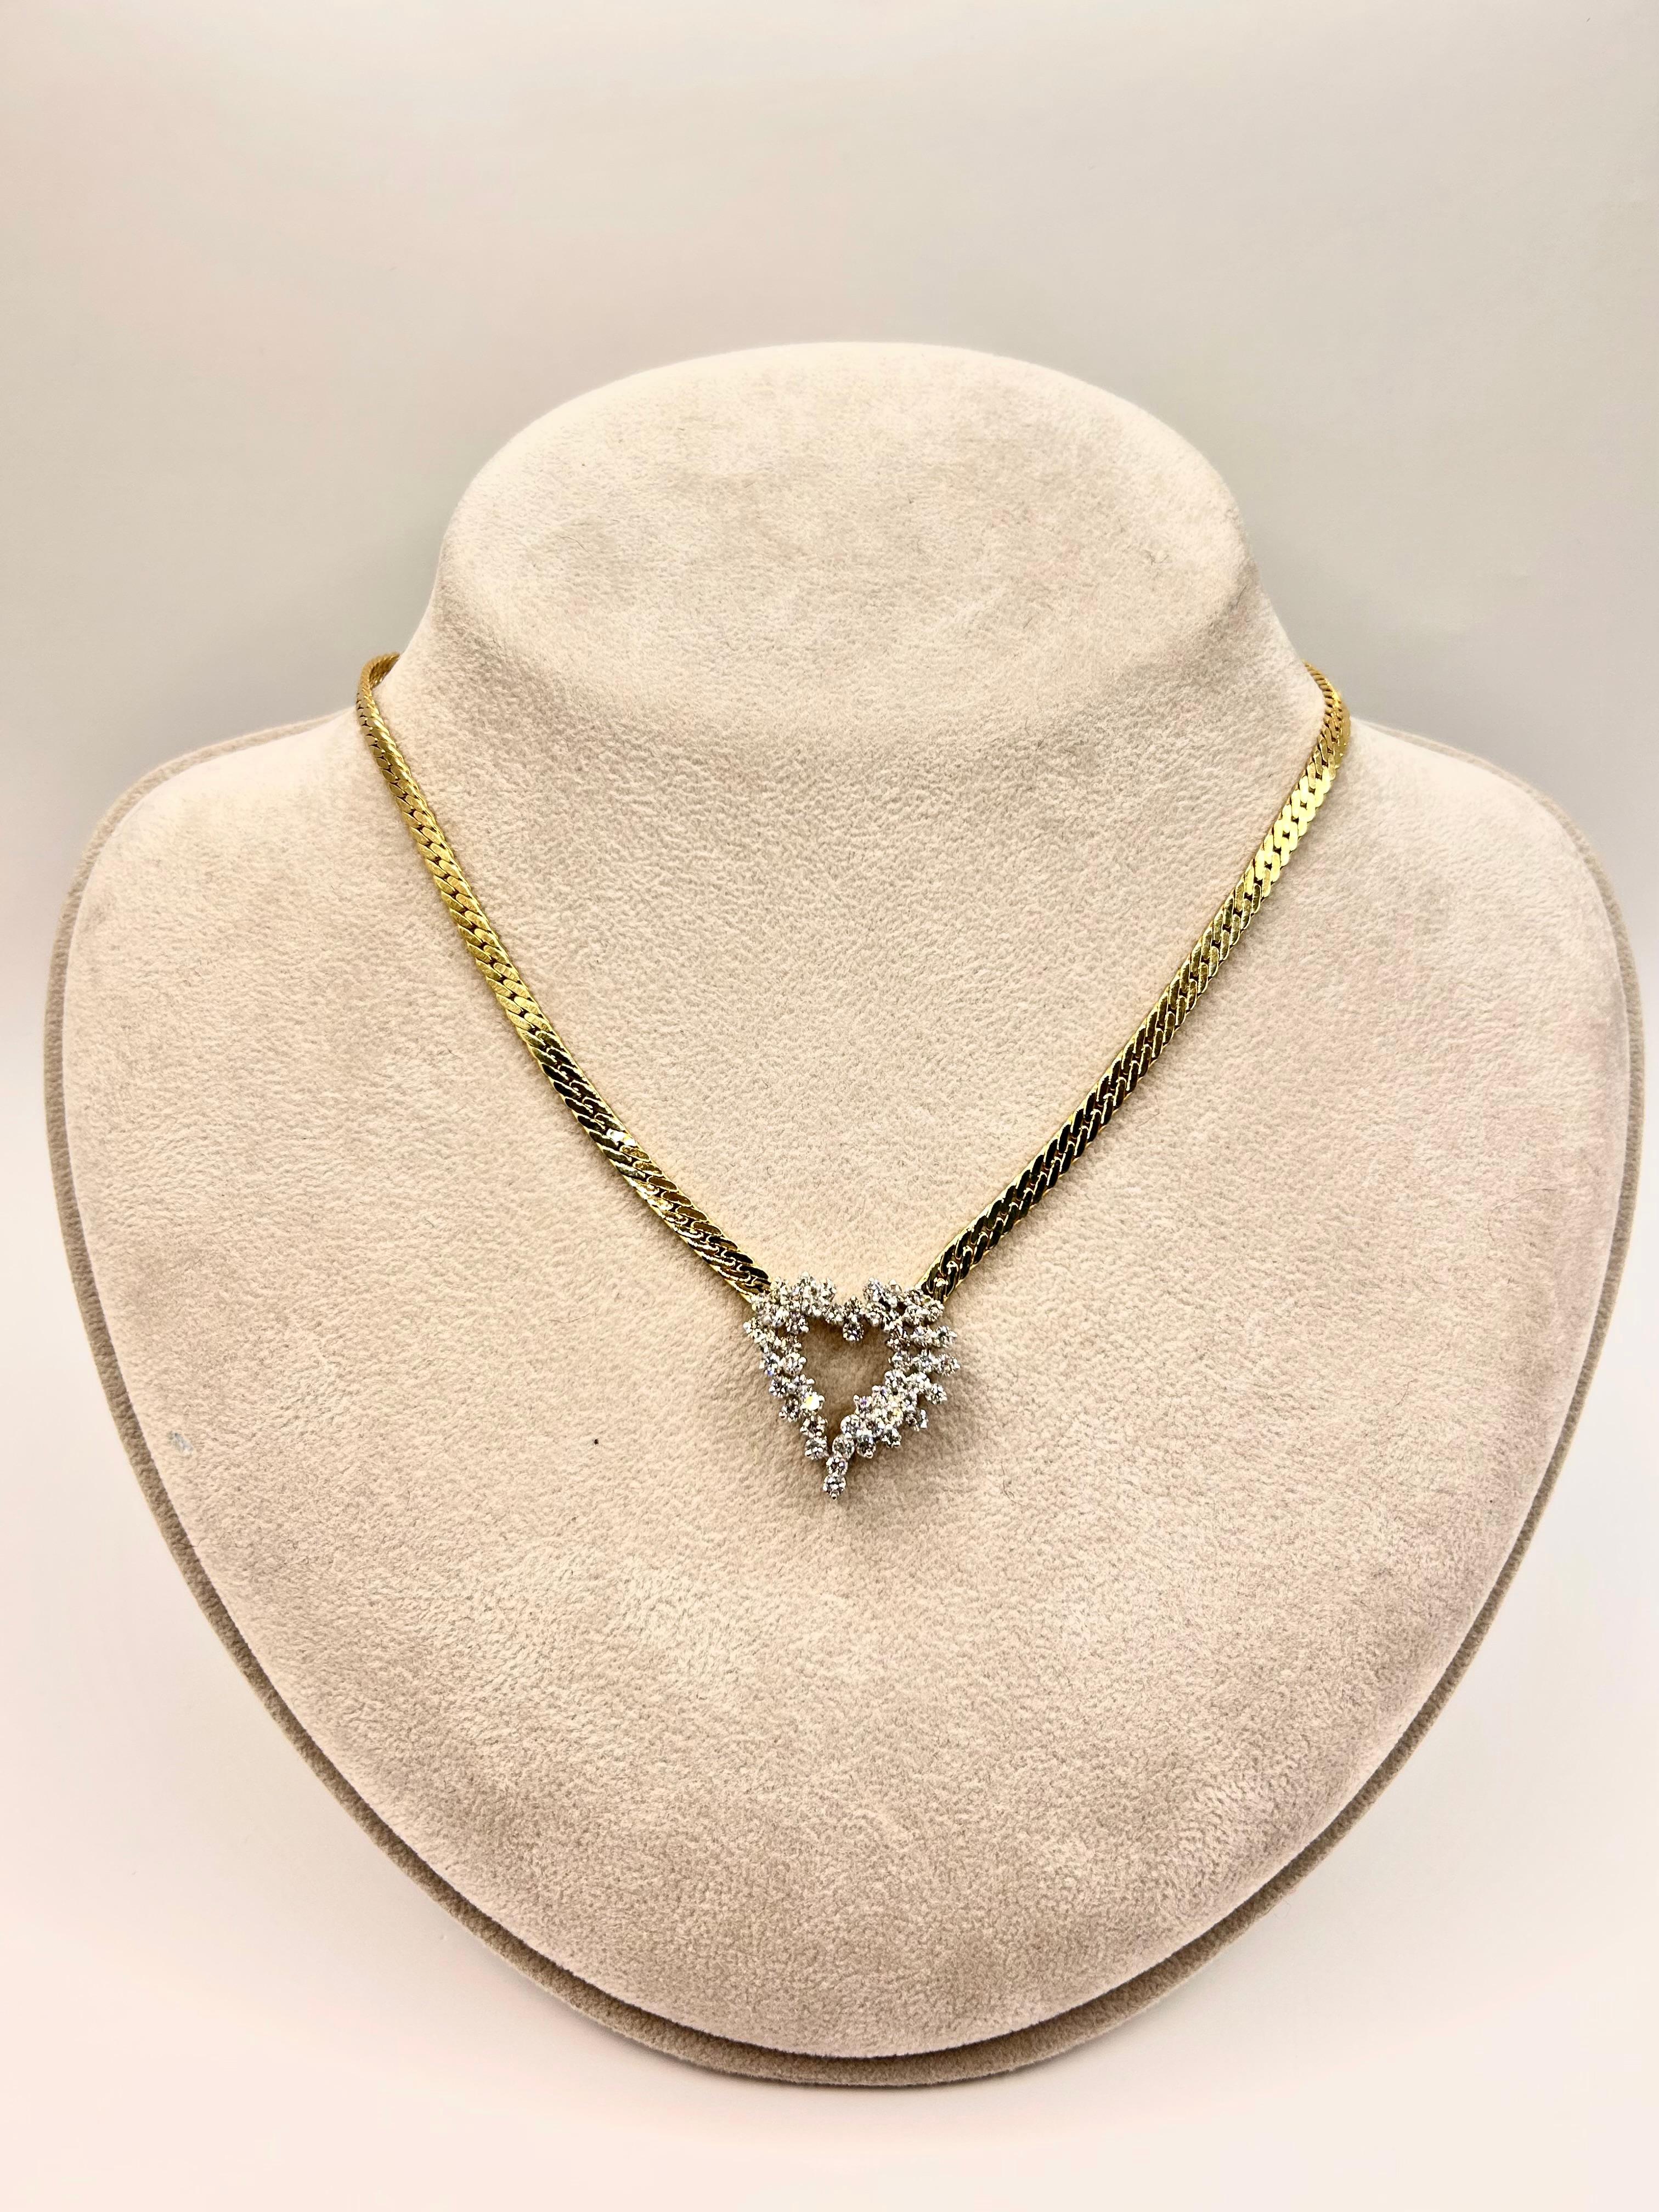 Brilliant Cut 14 Karat Yellow Gold Necklace with 2.50 Carat Total Weight of Diamonds For Sale